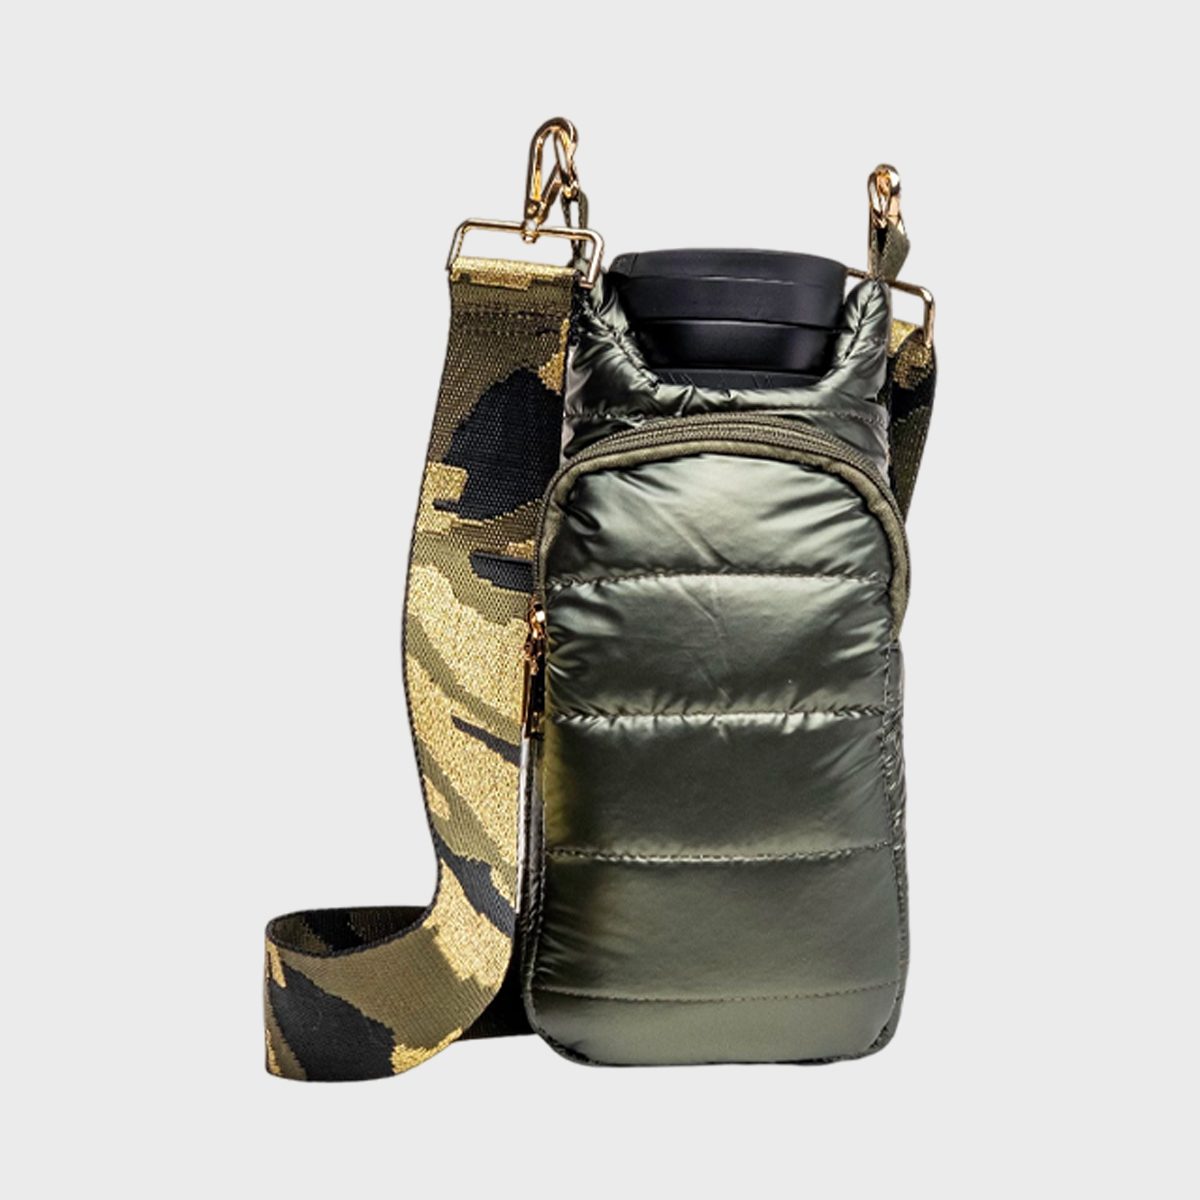 <p>Now that you have a water bottle, how will you make sure it's always within easy reach? And where will you keep the room key, cell phone, cash, ID and credit cards when walking around on the ship? Store those in a <a href="https://wanderfullbrand.com/products/army-green-wanderfull-hydrobag" rel="noopener">WanderFull HydroBag</a>, especially on <a href="https://www.rd.com/article/icon-of-the-seas/" rel="noopener noreferrer">the world's largest cruise ship</a> when it's not always convenient to make your way back to the room.</p> <p>Let the water-resistant pockets store all the essentials, while the main compartment fits up to a 32-ounce water bottle or reusable coffee cup (that section is also waterproof to prevent any leaks). It comes in 15 colors and offers an interchangeable adjustable strap to wear as a crossbody.</p> <p class="listicle-page__cta-button-shop"><a class="shop-btn" href="https://wanderfullbrand.com/products/army-green-wanderfull-hydrobag">Shop Now</a></p>